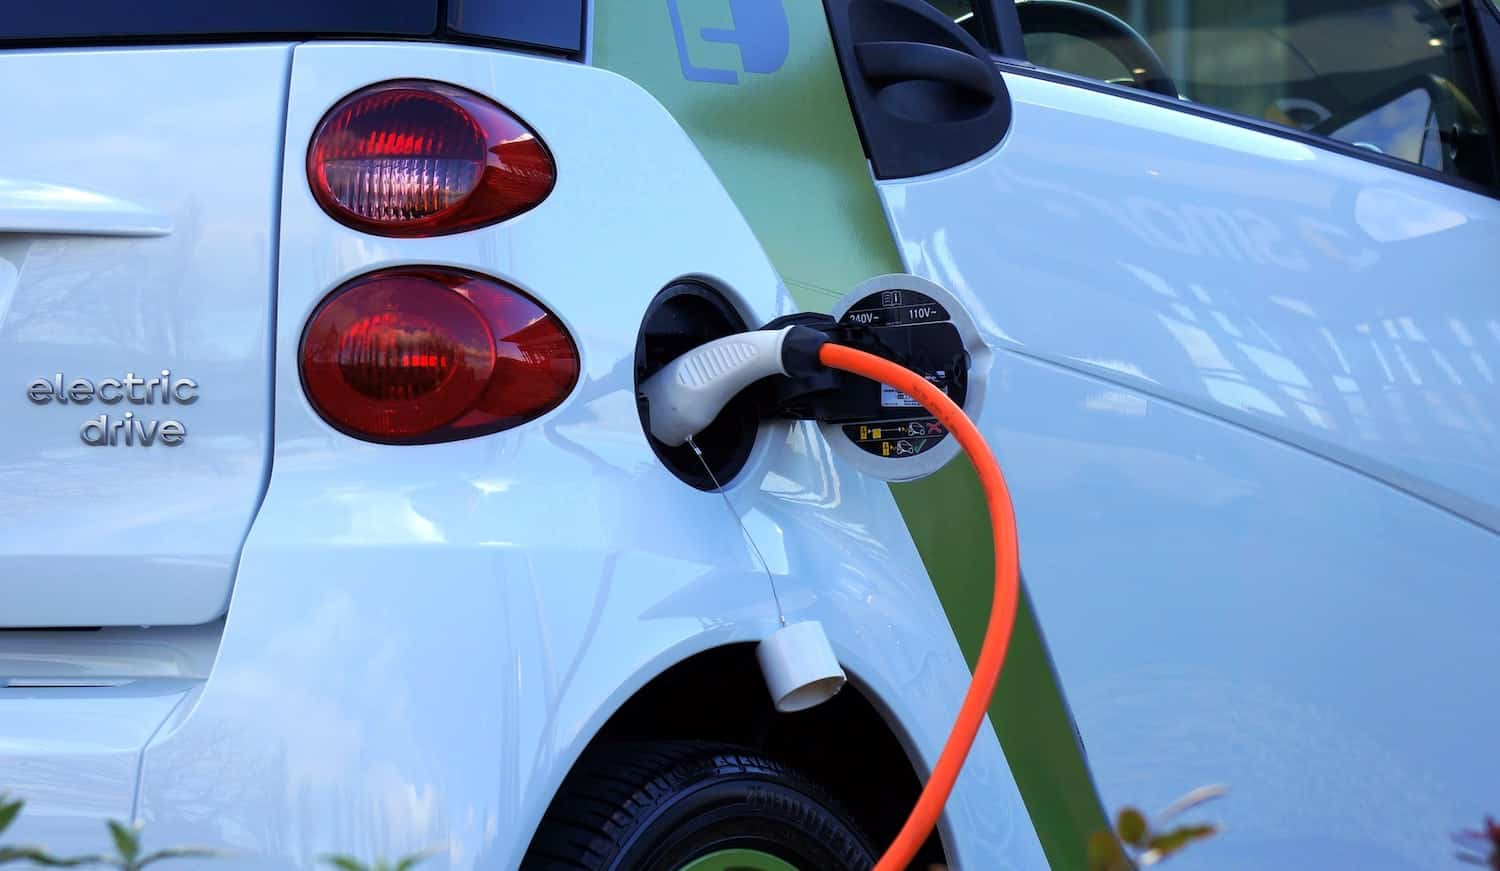 Study Electric vehicle adoption improves air quality and climate